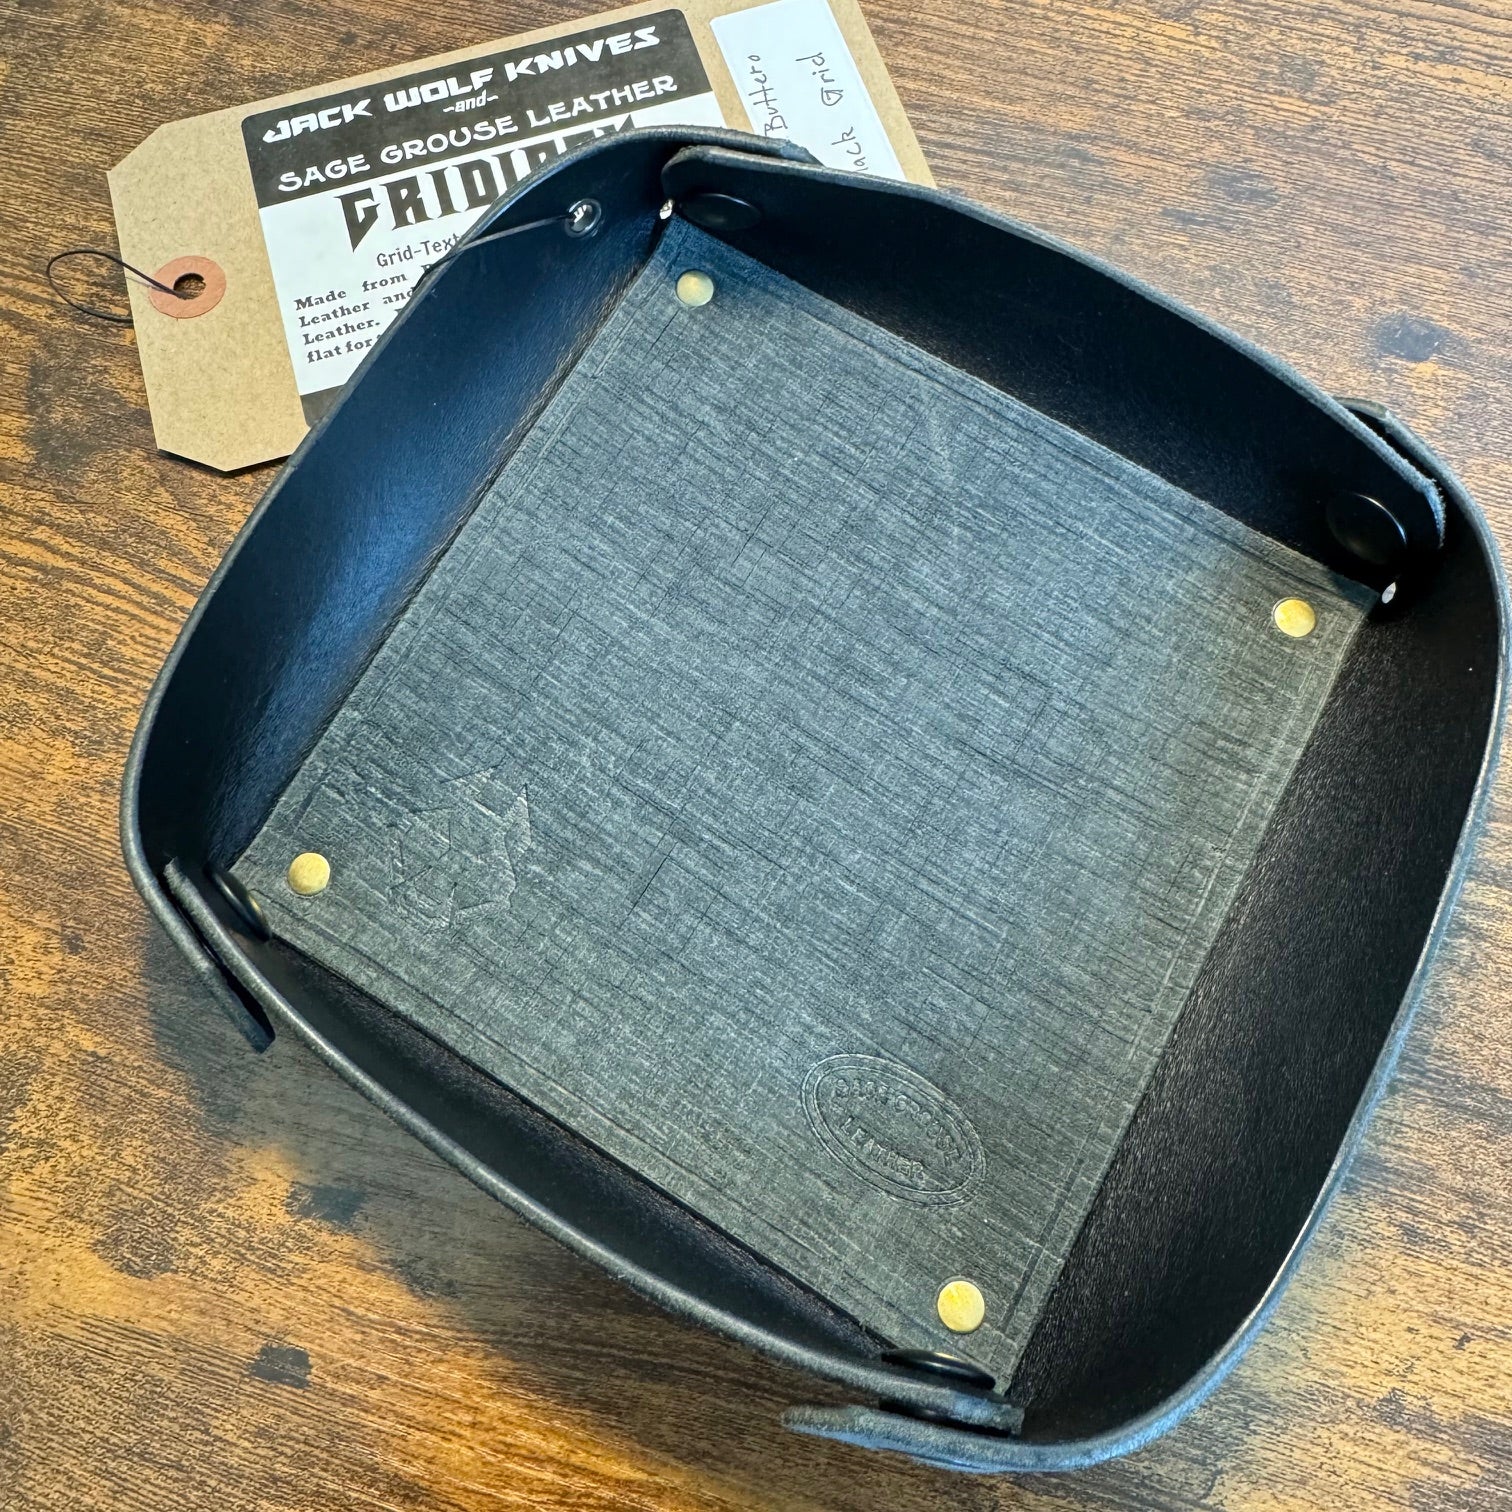 Sage Grouse Folding Gridiron Tray – Black Buttero and Black Grid Leather